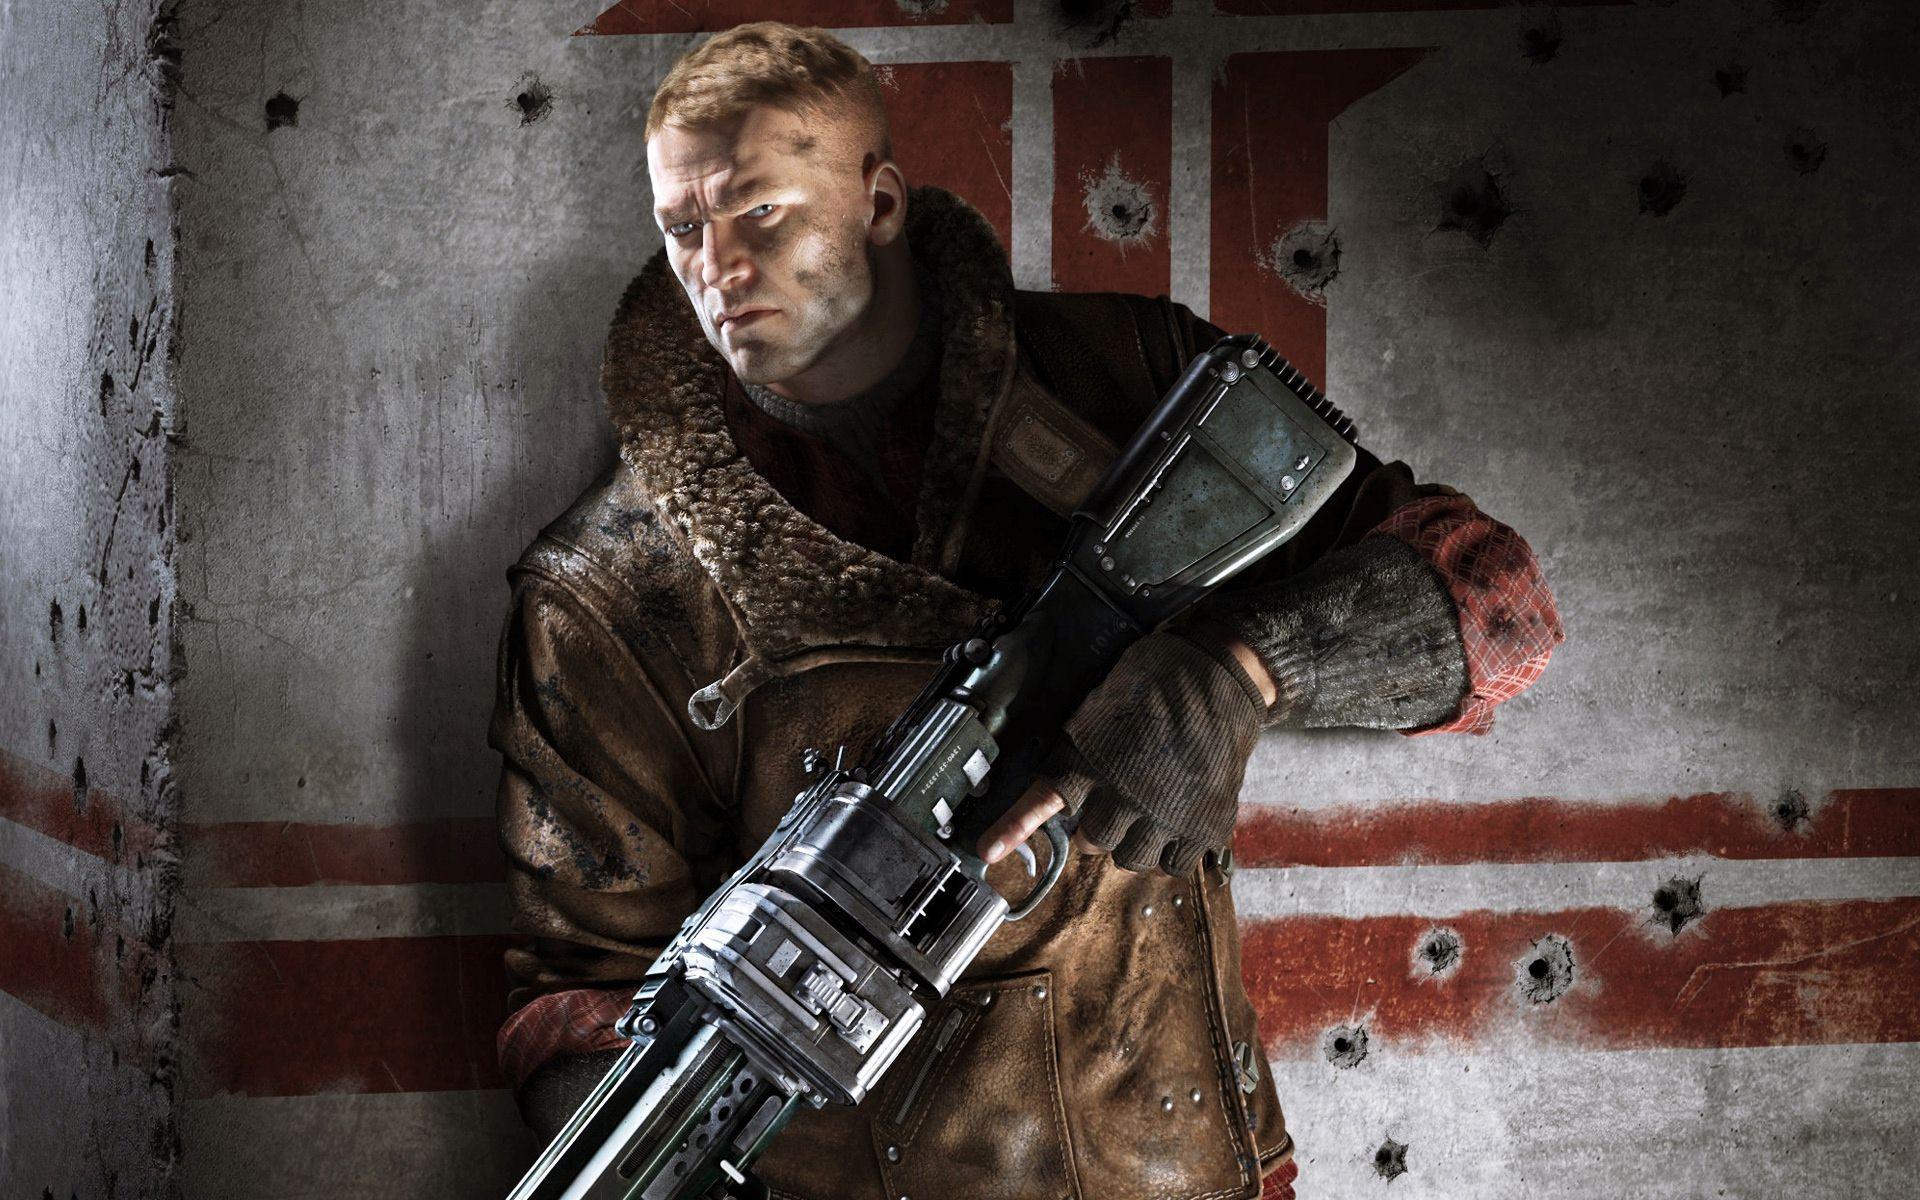 Wallpaper  Wolfenstein II The New Colossus Games posters 2778x3434   lys57  1209761  HD Wallpapers  WallHere